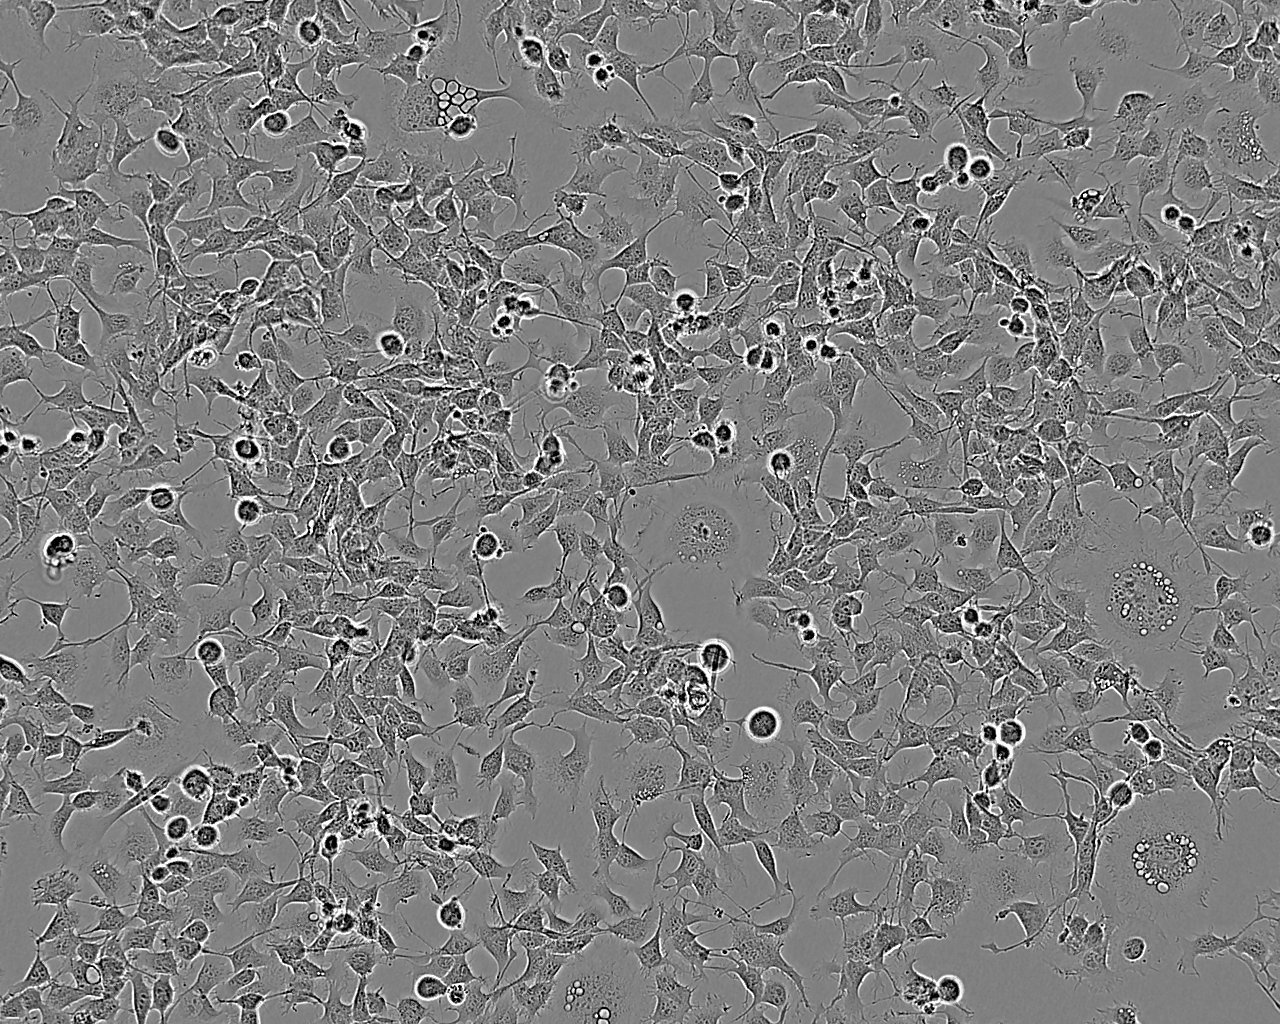 SW954 epithelioid cells人阴户鳞癌细胞系,SW954 epithelioid cells